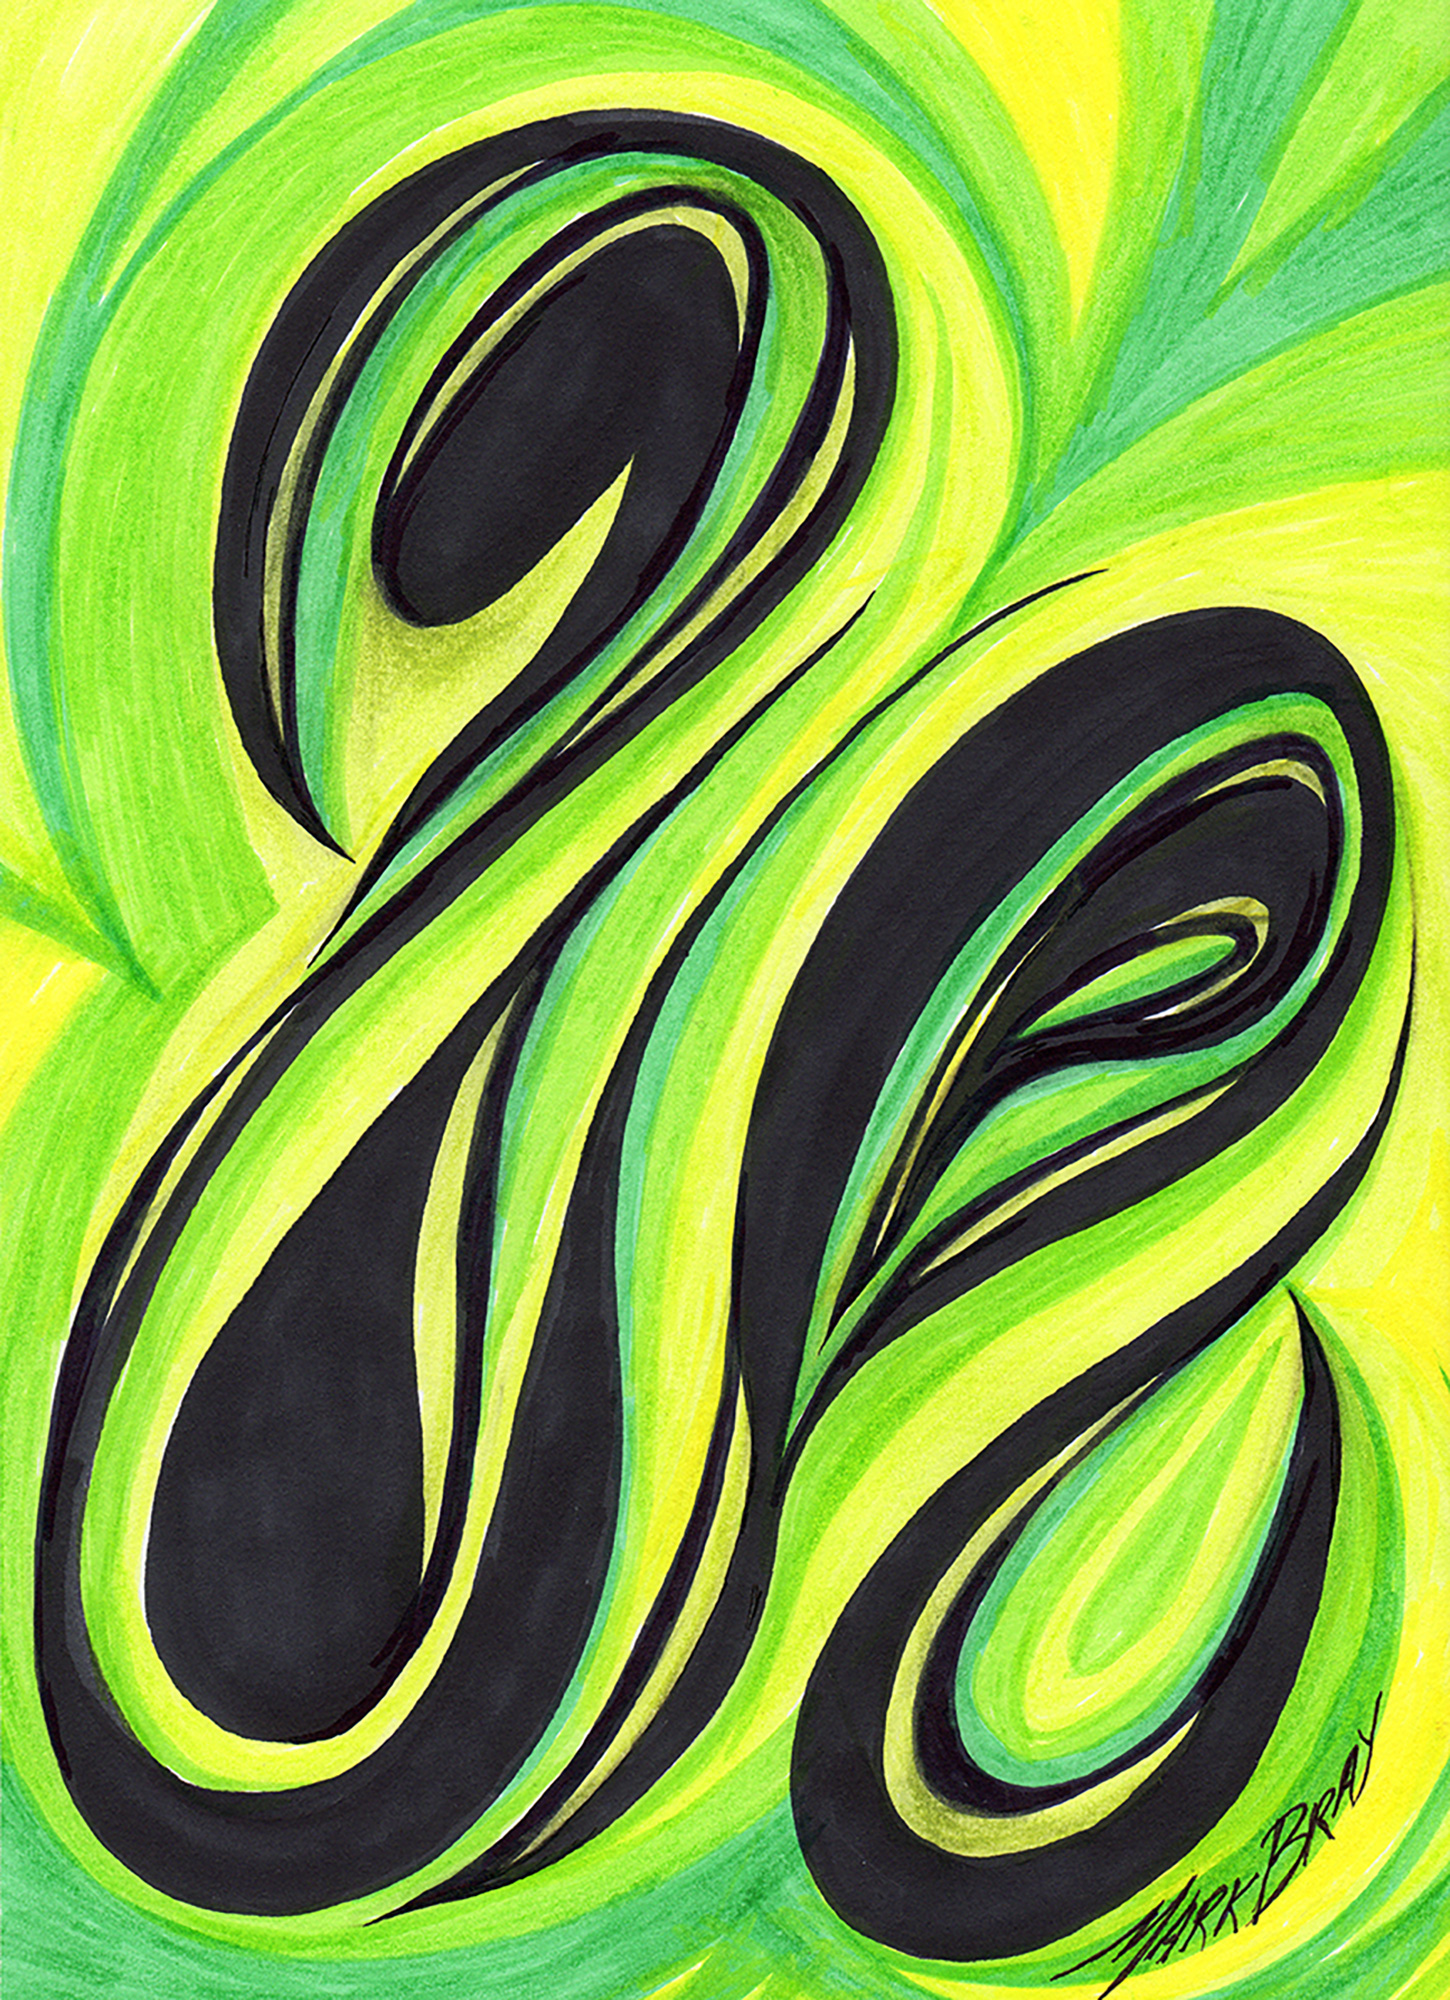 What is yellow and green with big black swirls?